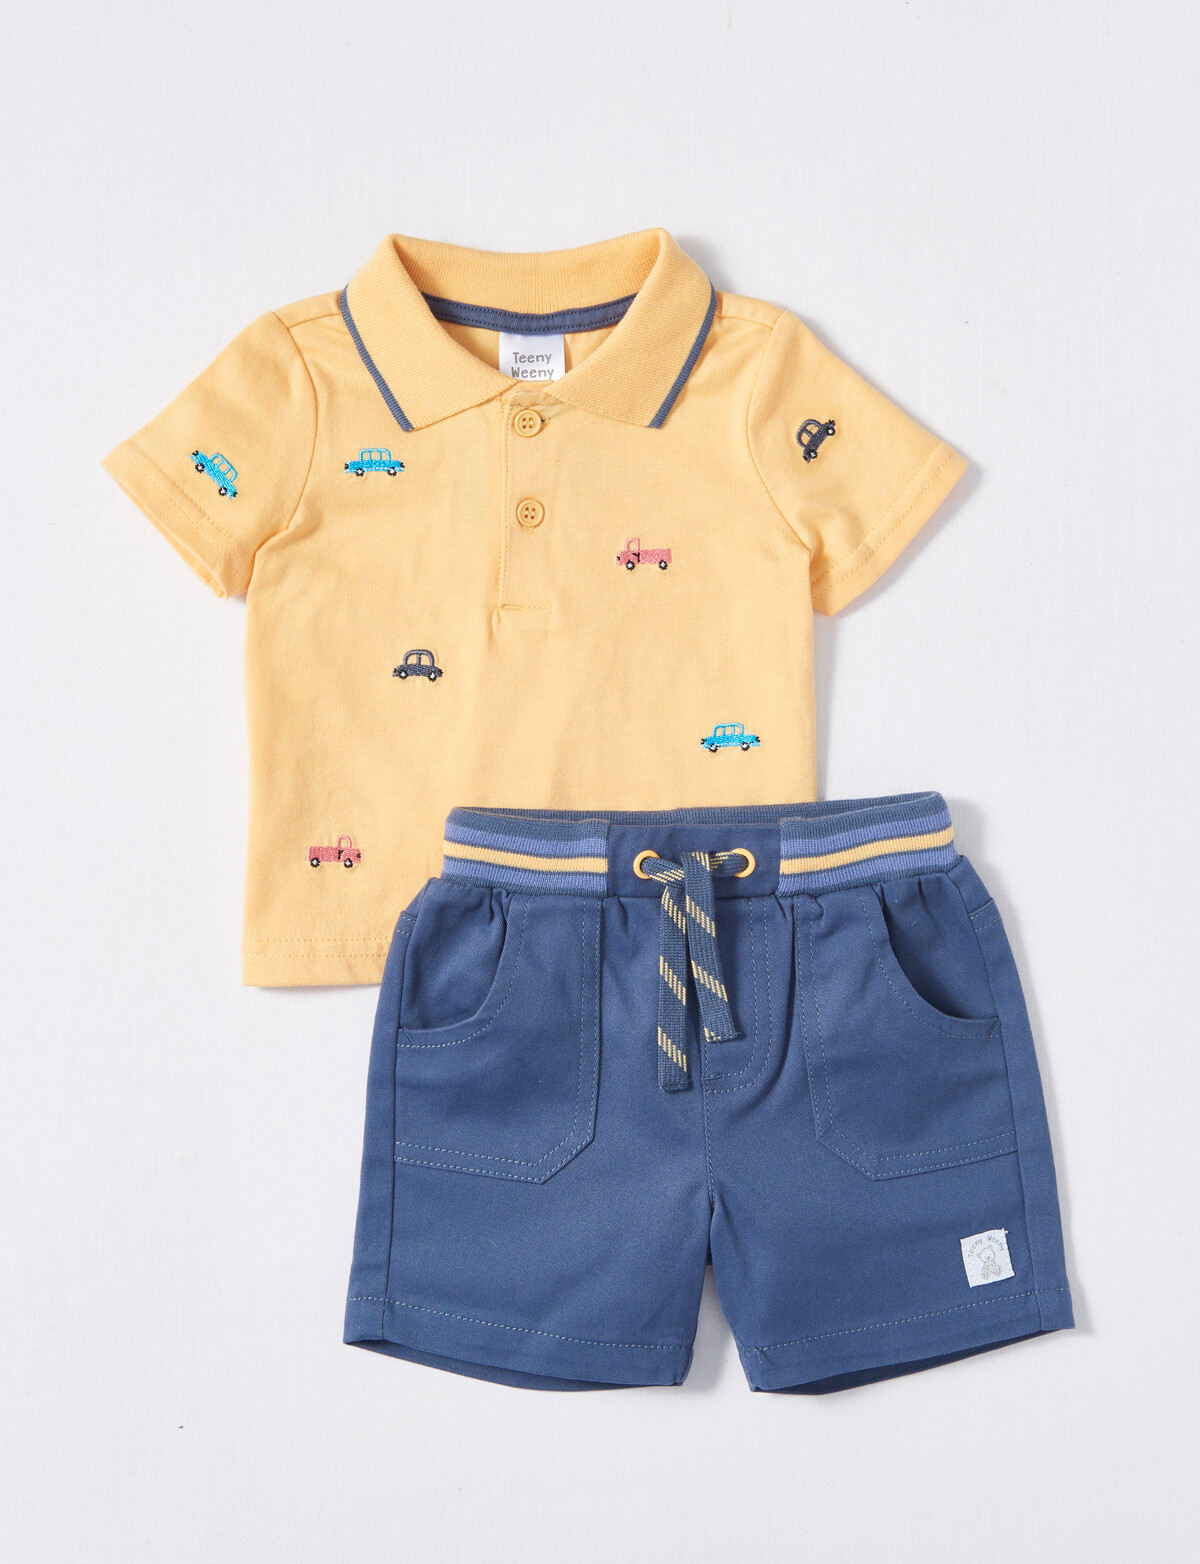 Teeny Weeny Dig It Polo & Woven Short Set, 2-Piece - Clothing Sets